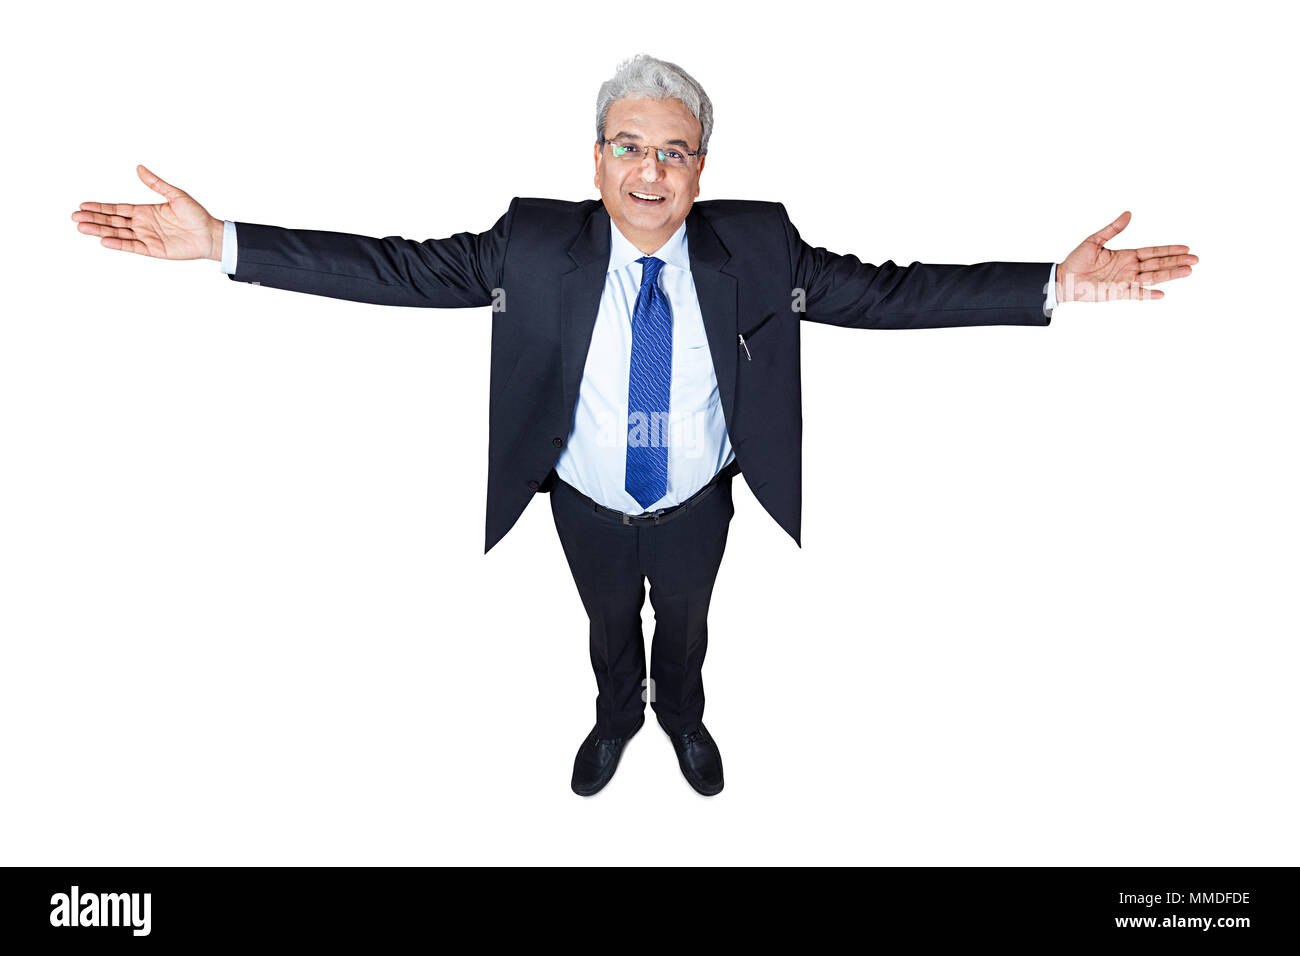 Aspiration One Business Male Arms Outstretched Standing On White Background Stock Photo